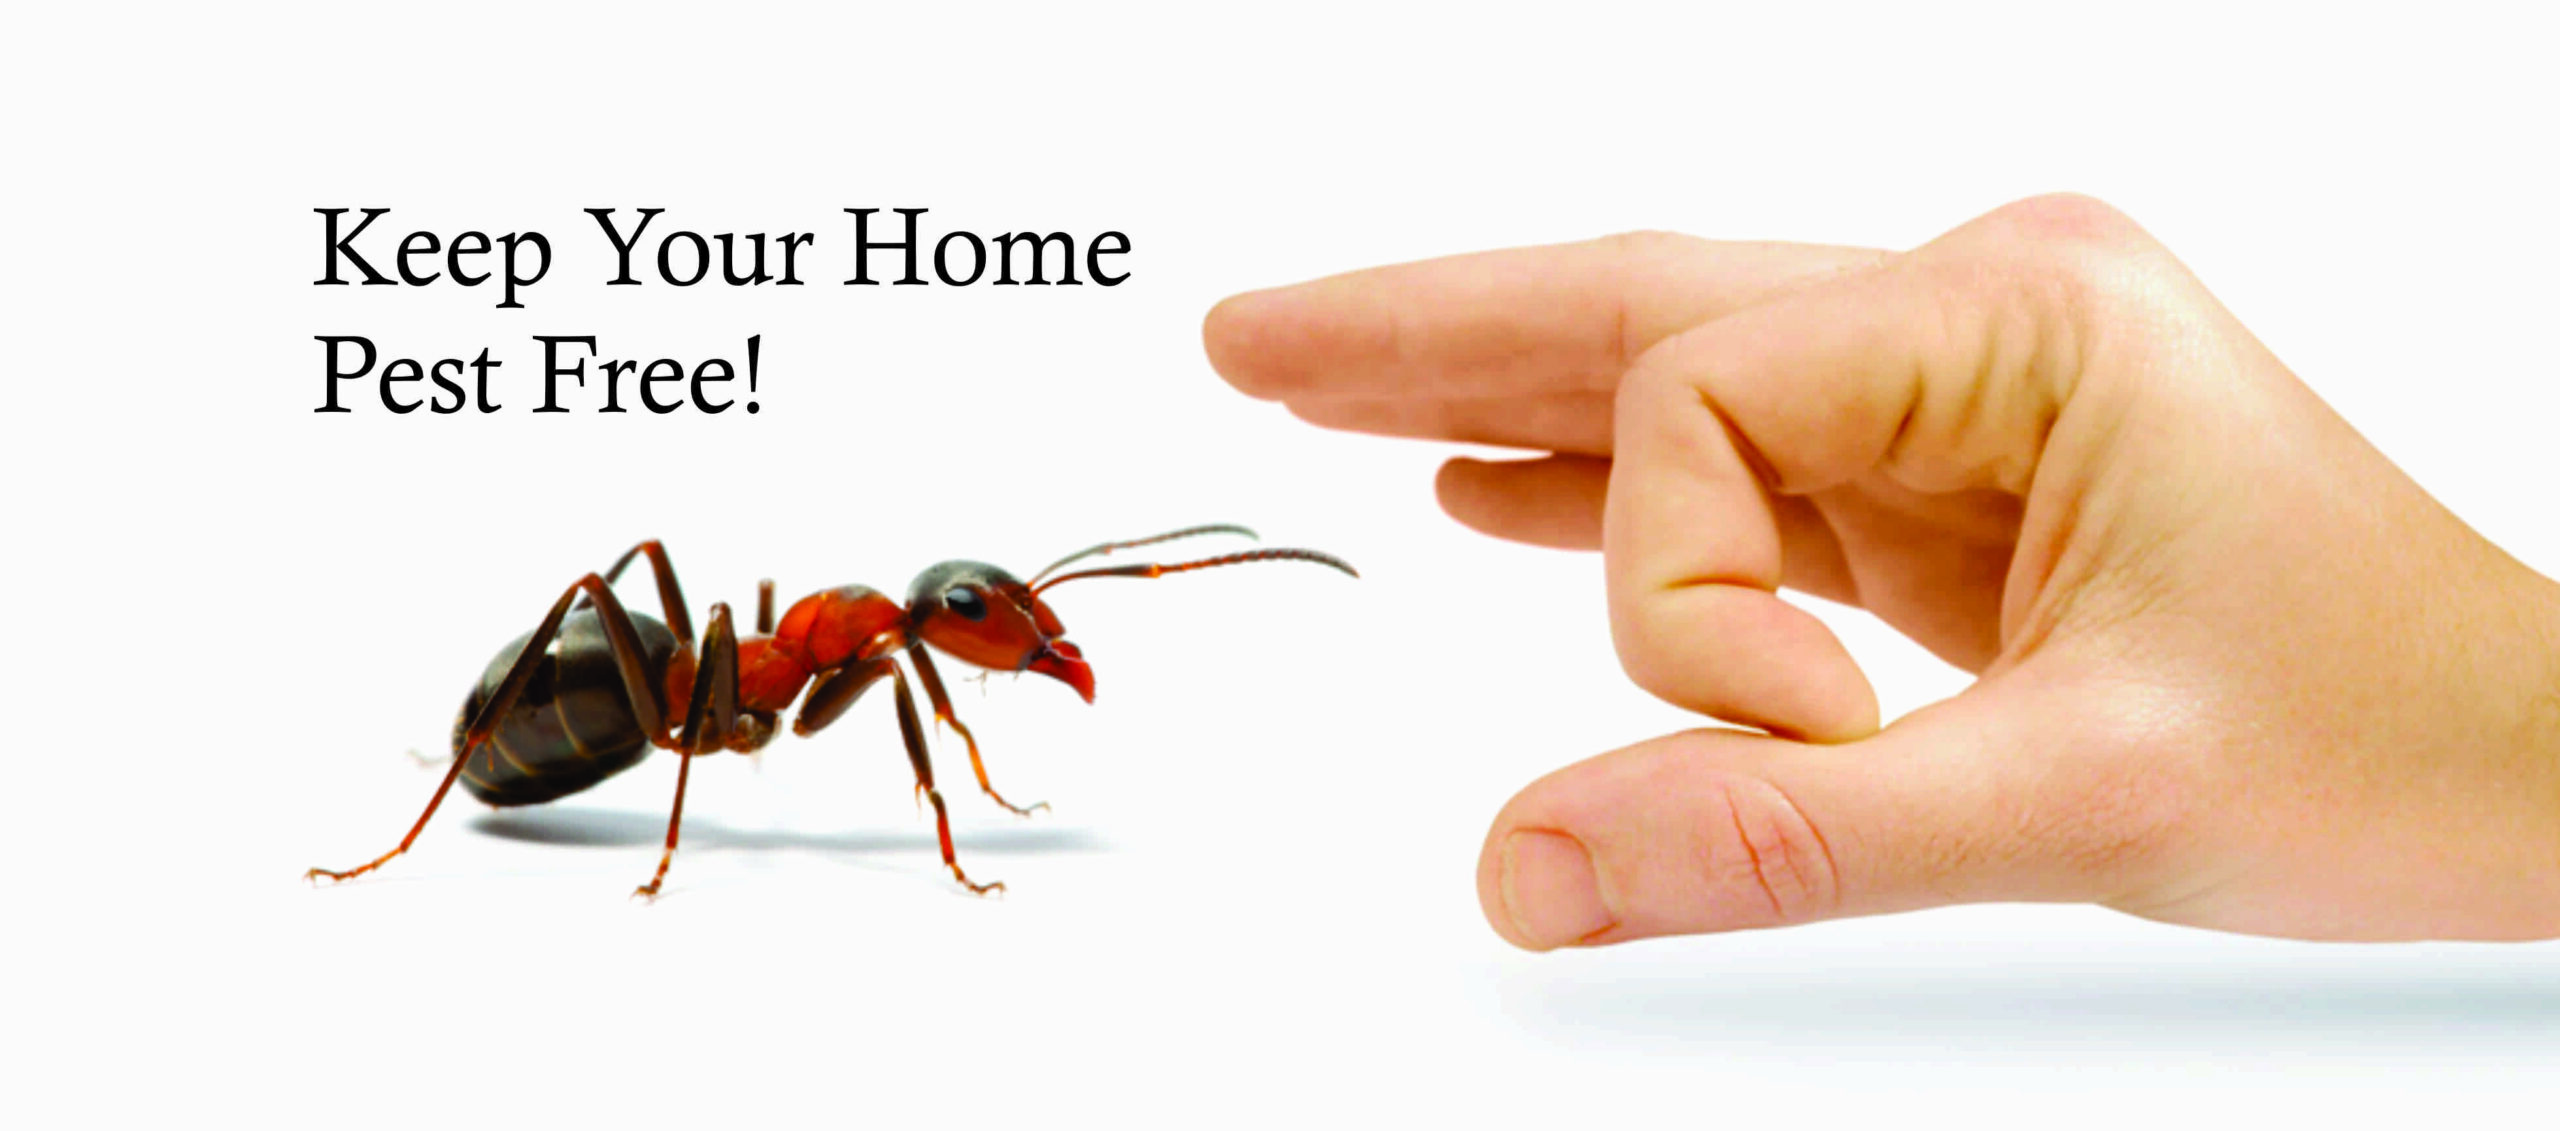 Fumigation Services in Islamabad: Protect Your Home with Termite Control Services in Lahore